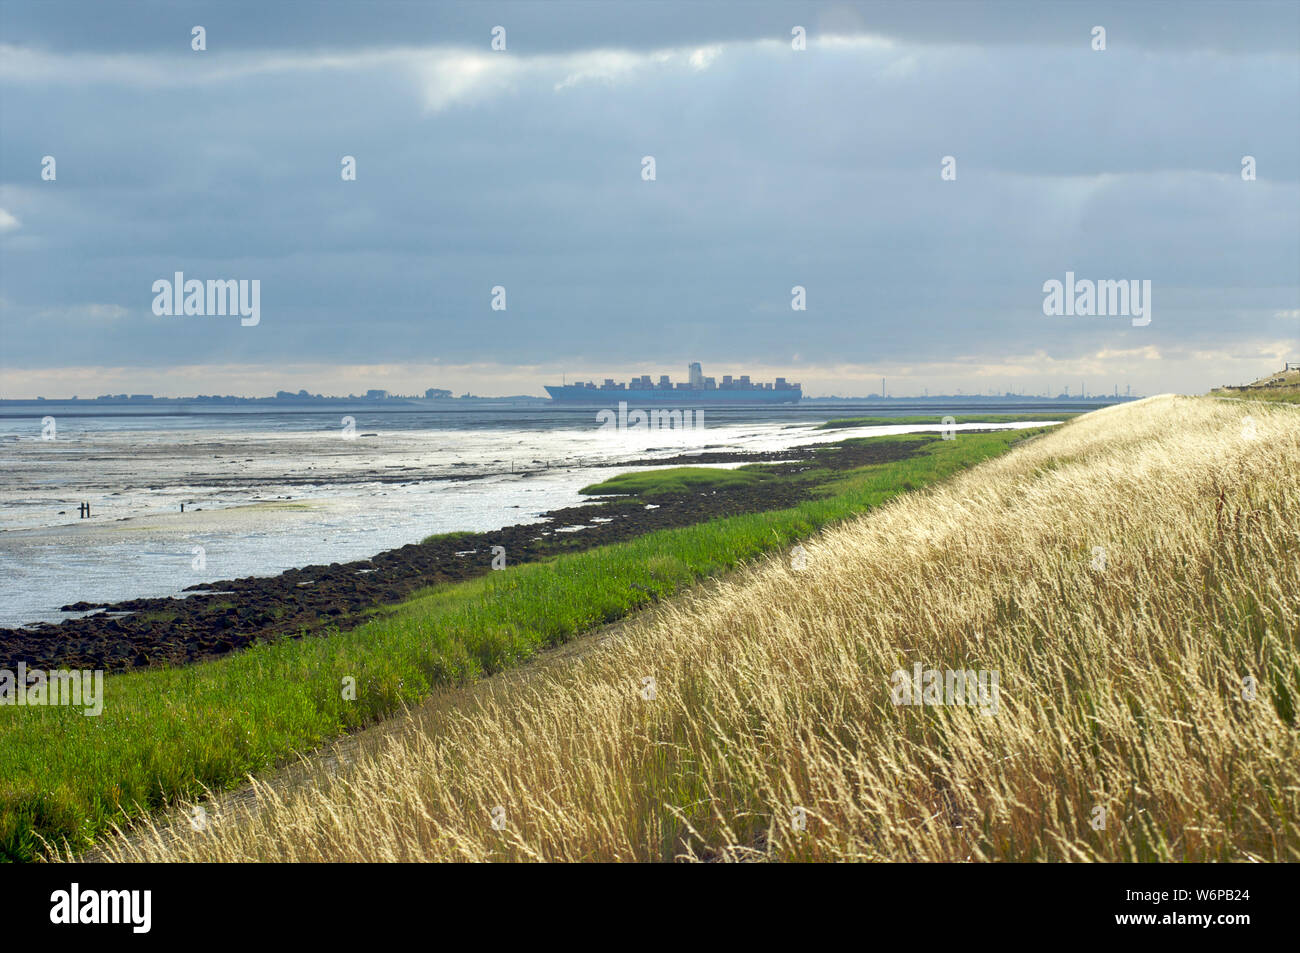 A large container ship sails on the Westerschelde during low tide behind the dike in Zeeland, the Netherlands Stock Photo